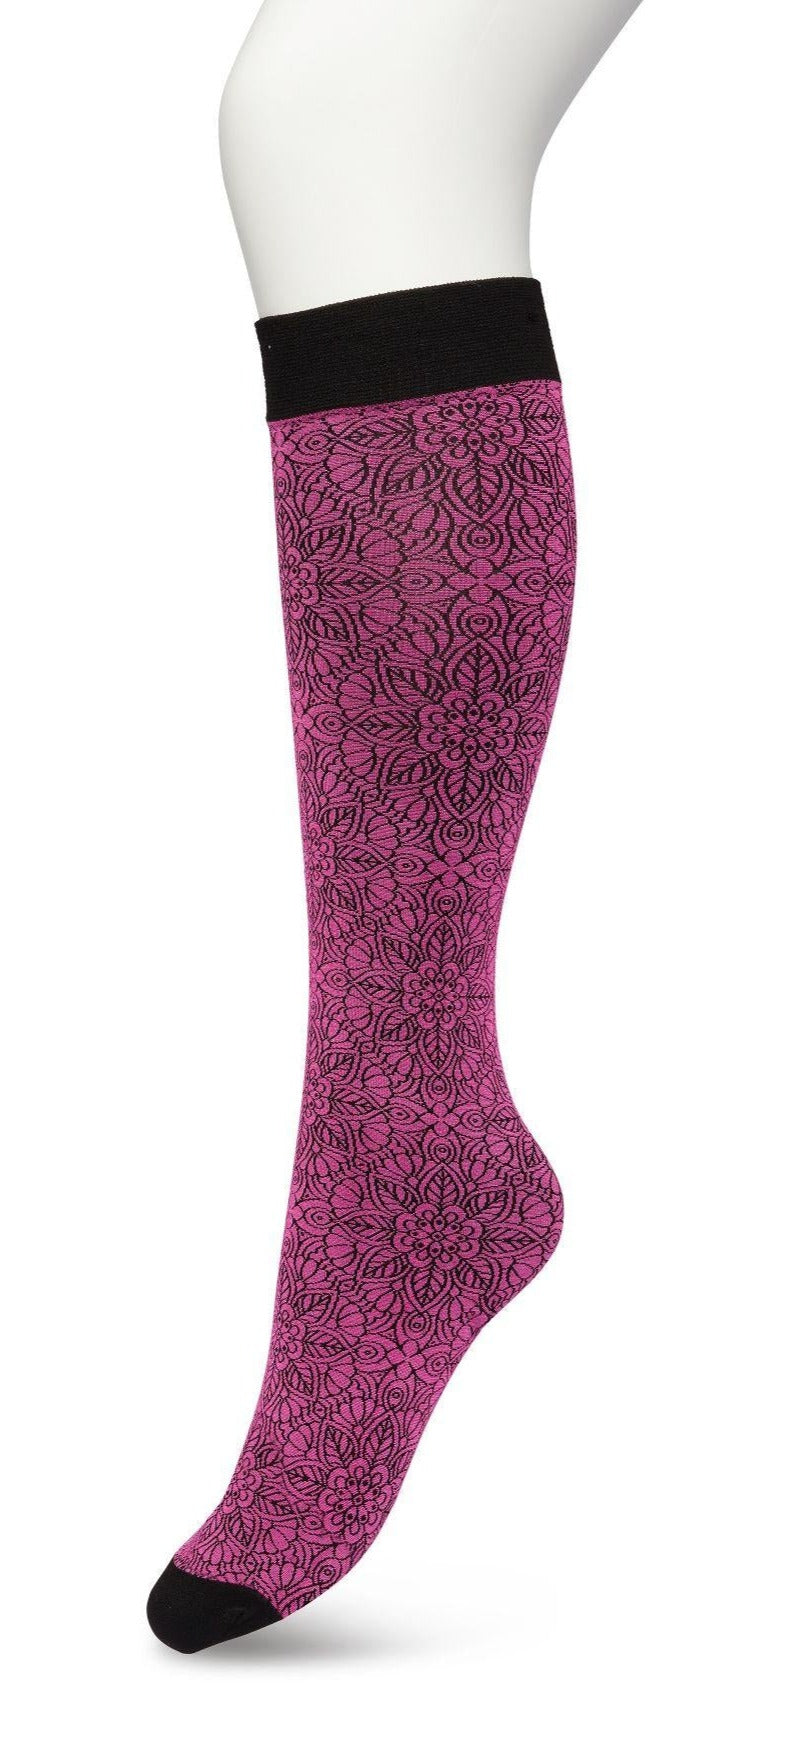 Bonnie Doon Mandala Knee-Highs - Ultra opaque pink fashion knee-high glossy socks with a black mandala floral style pattern in black and a deep black comfort cuff.